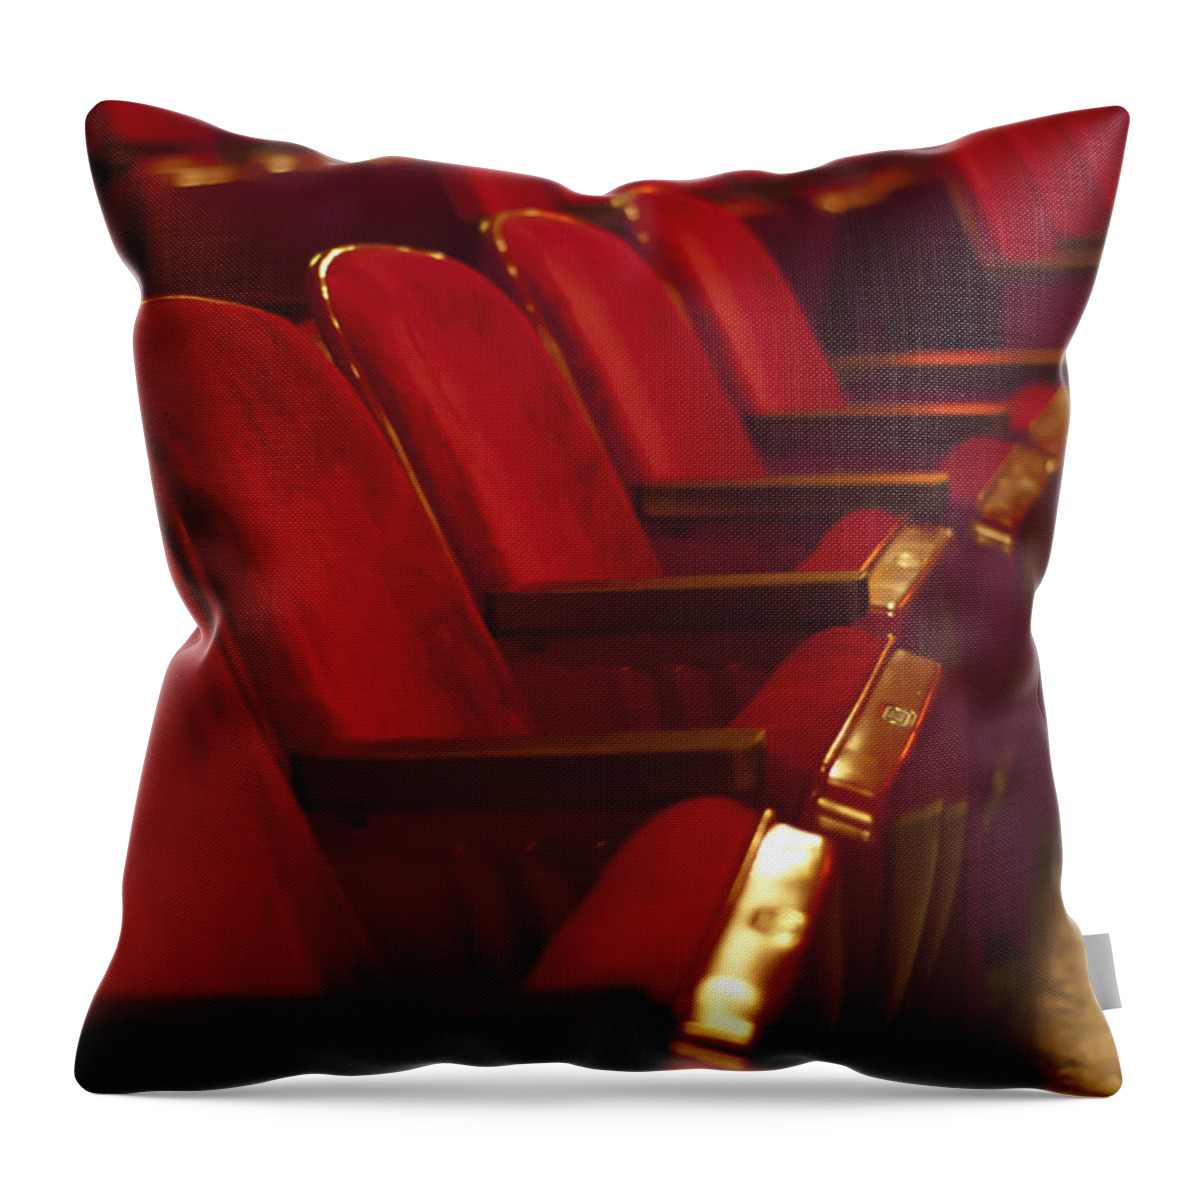 Theater Throw Pillow featuring the photograph Theater Seating by Carolyn Marshall